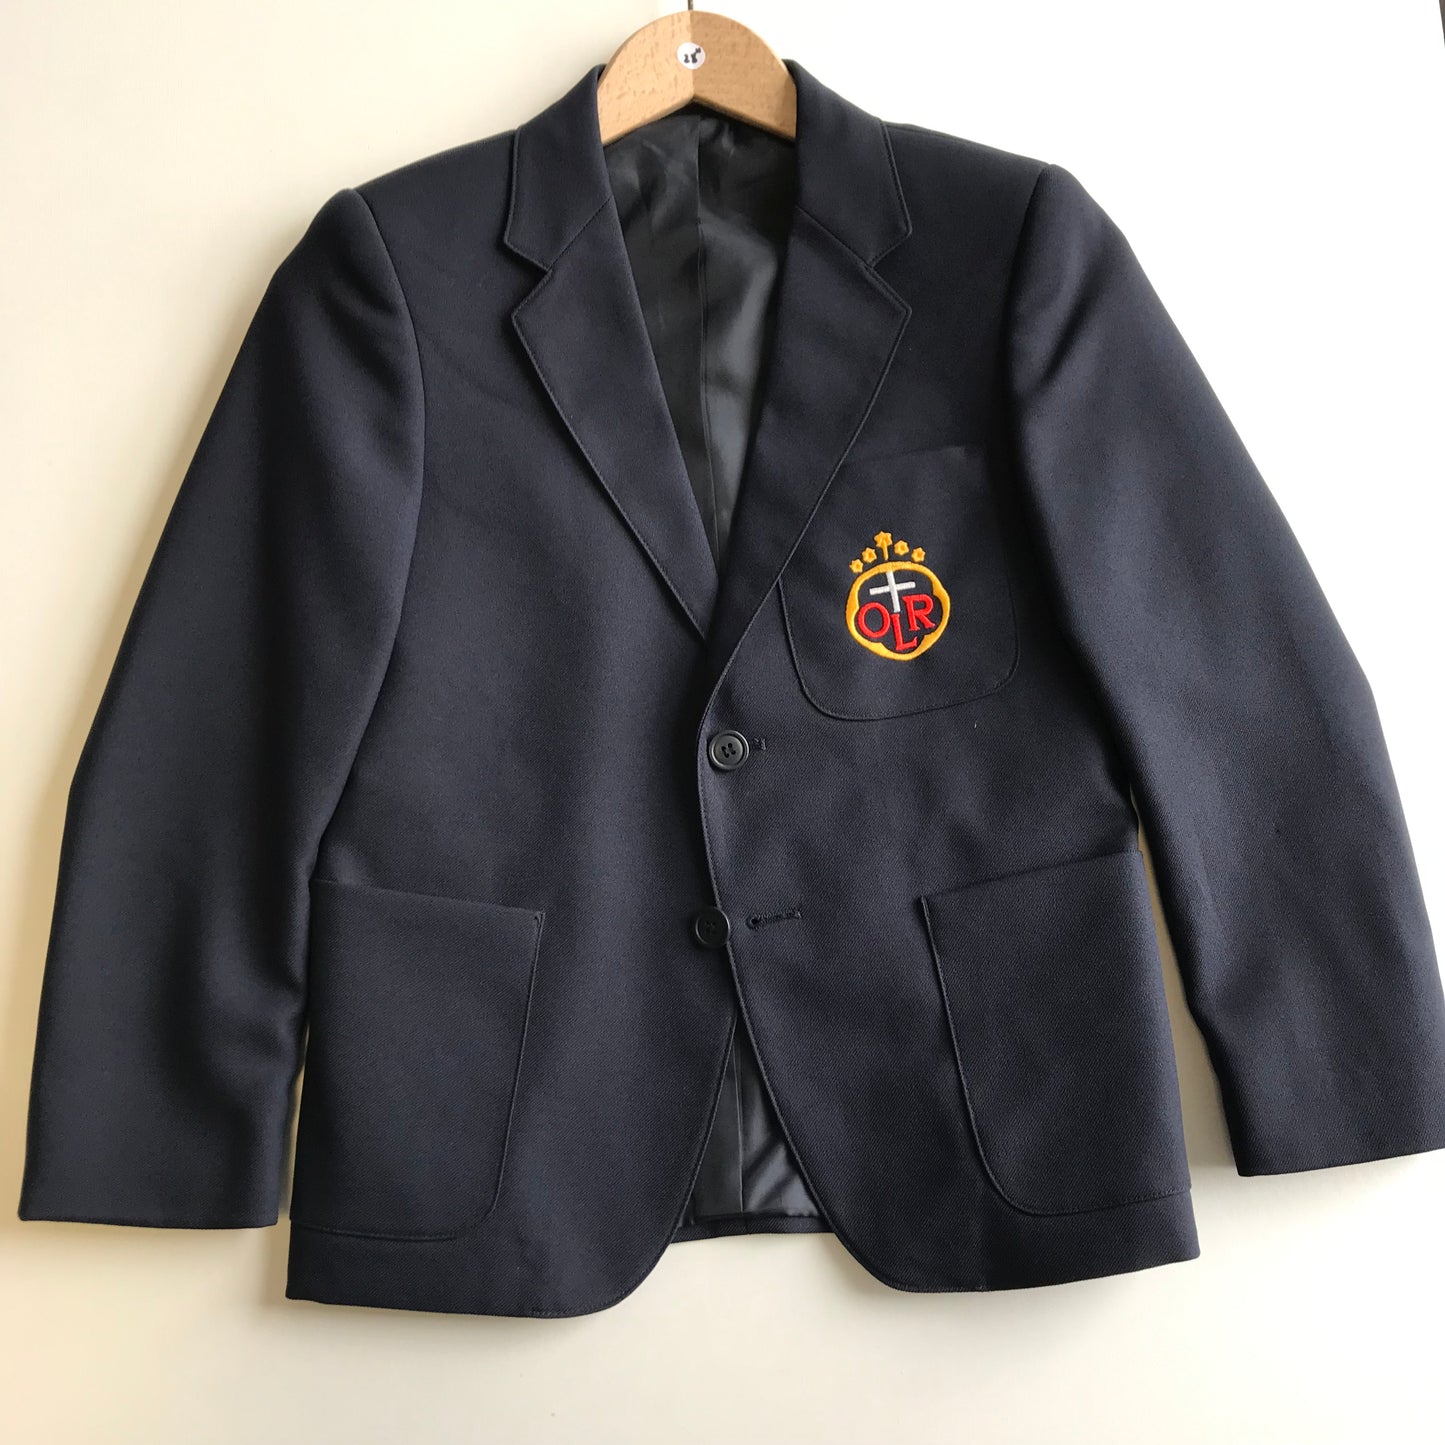 Our Lady of the Rosary Blazer - Size 6 - 71cm/28in